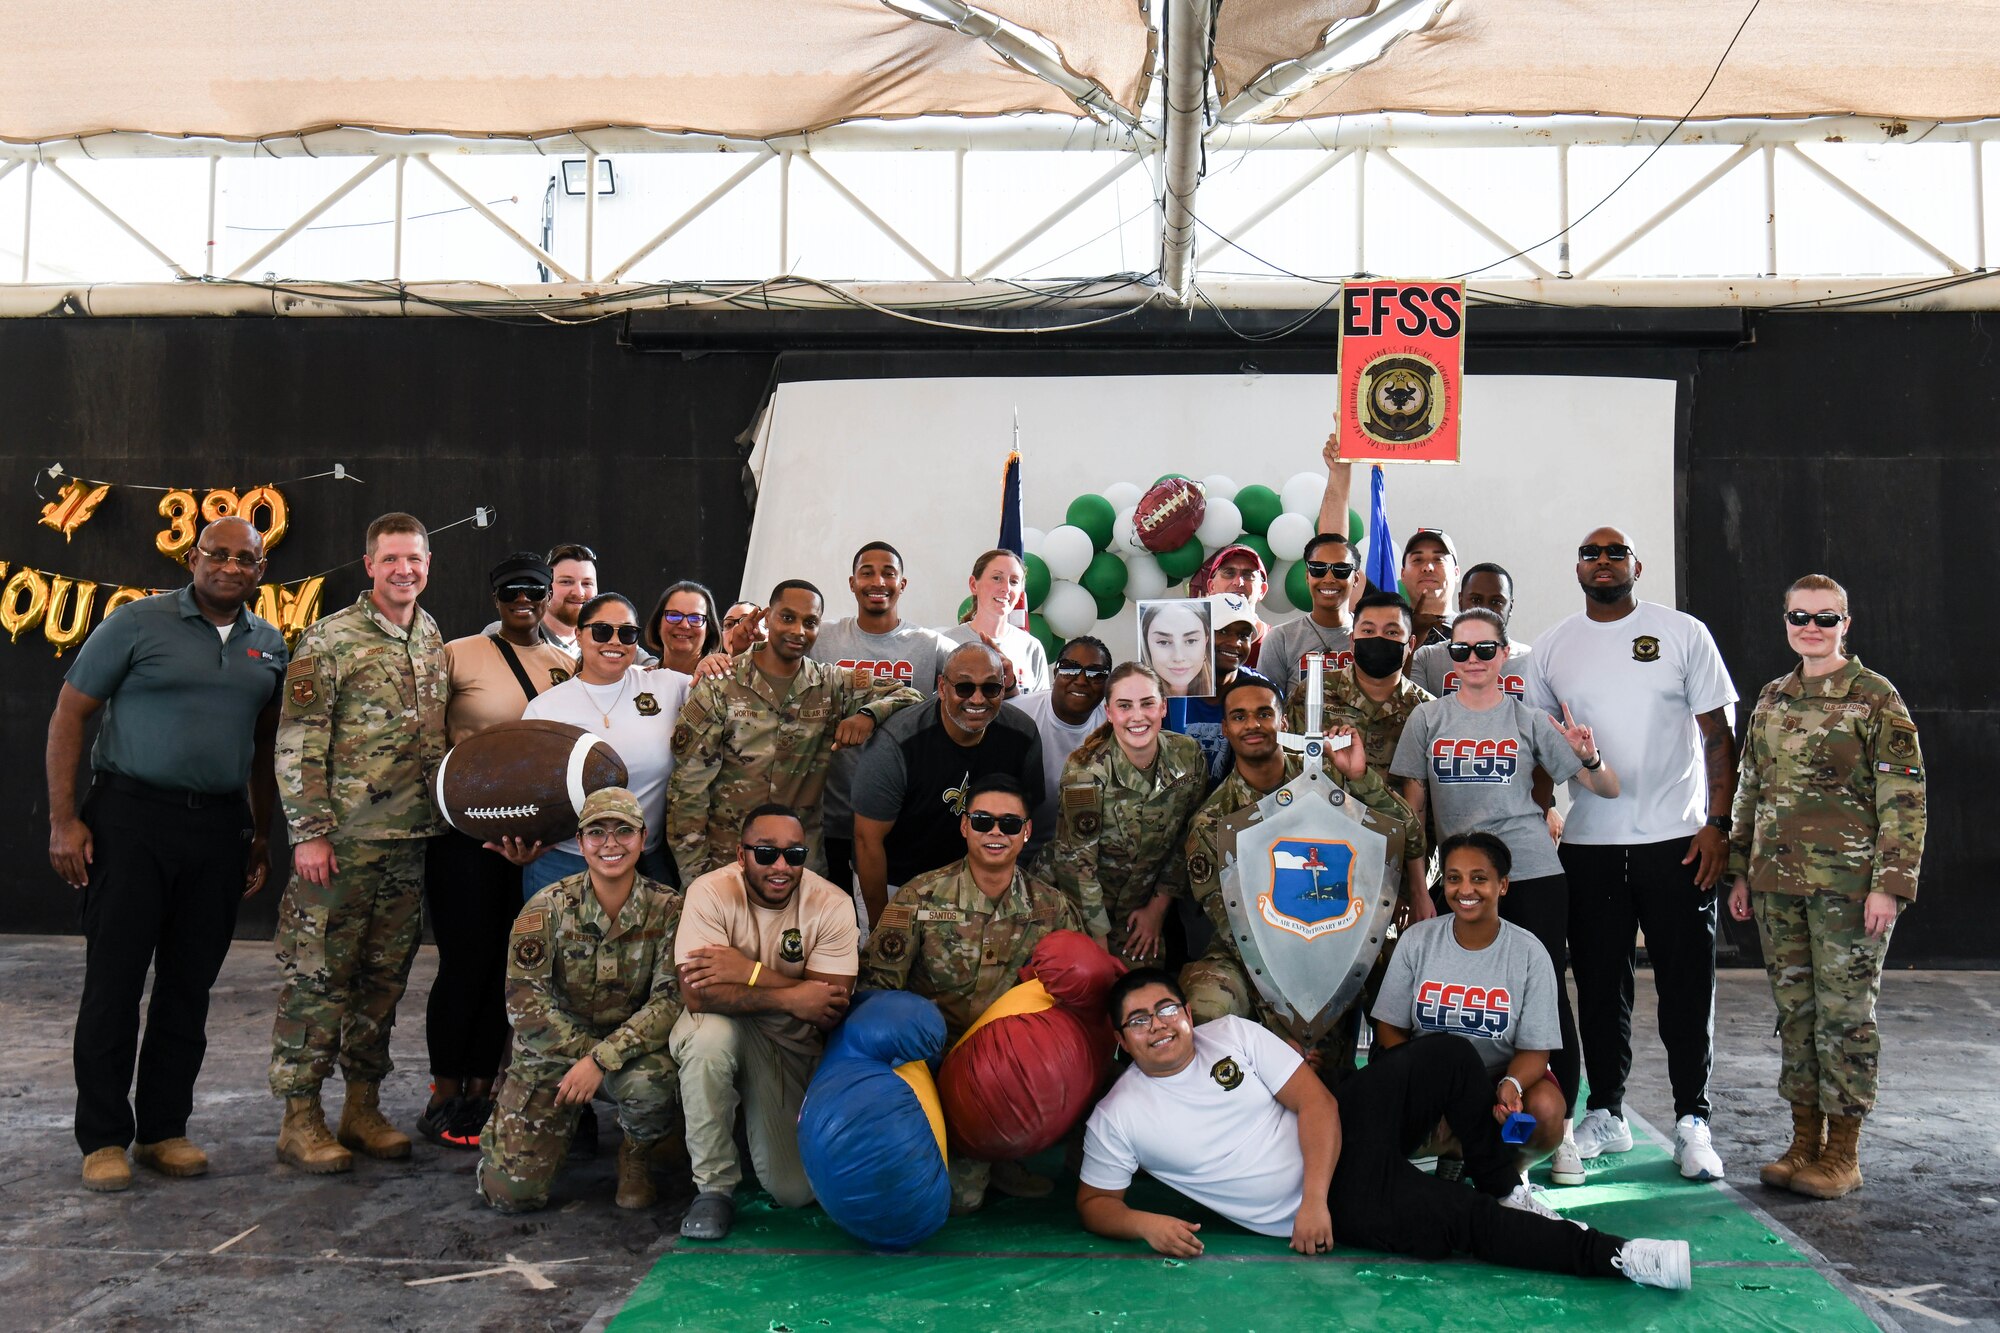 The 380th Air Expeditionary Wing celebrated their top performers during a quarterly awards ceremony at the Phantom Pavilion, October 4, 2022 at Al Dhafra Air Base, United Arab Emirates. Embracing the spirit of football season, the theme for the third quarter awards was a tailgating event. Airmen were encouraged to wear their favorite team’s jerseys and decorate their sections while they cheered on their Wingmen.